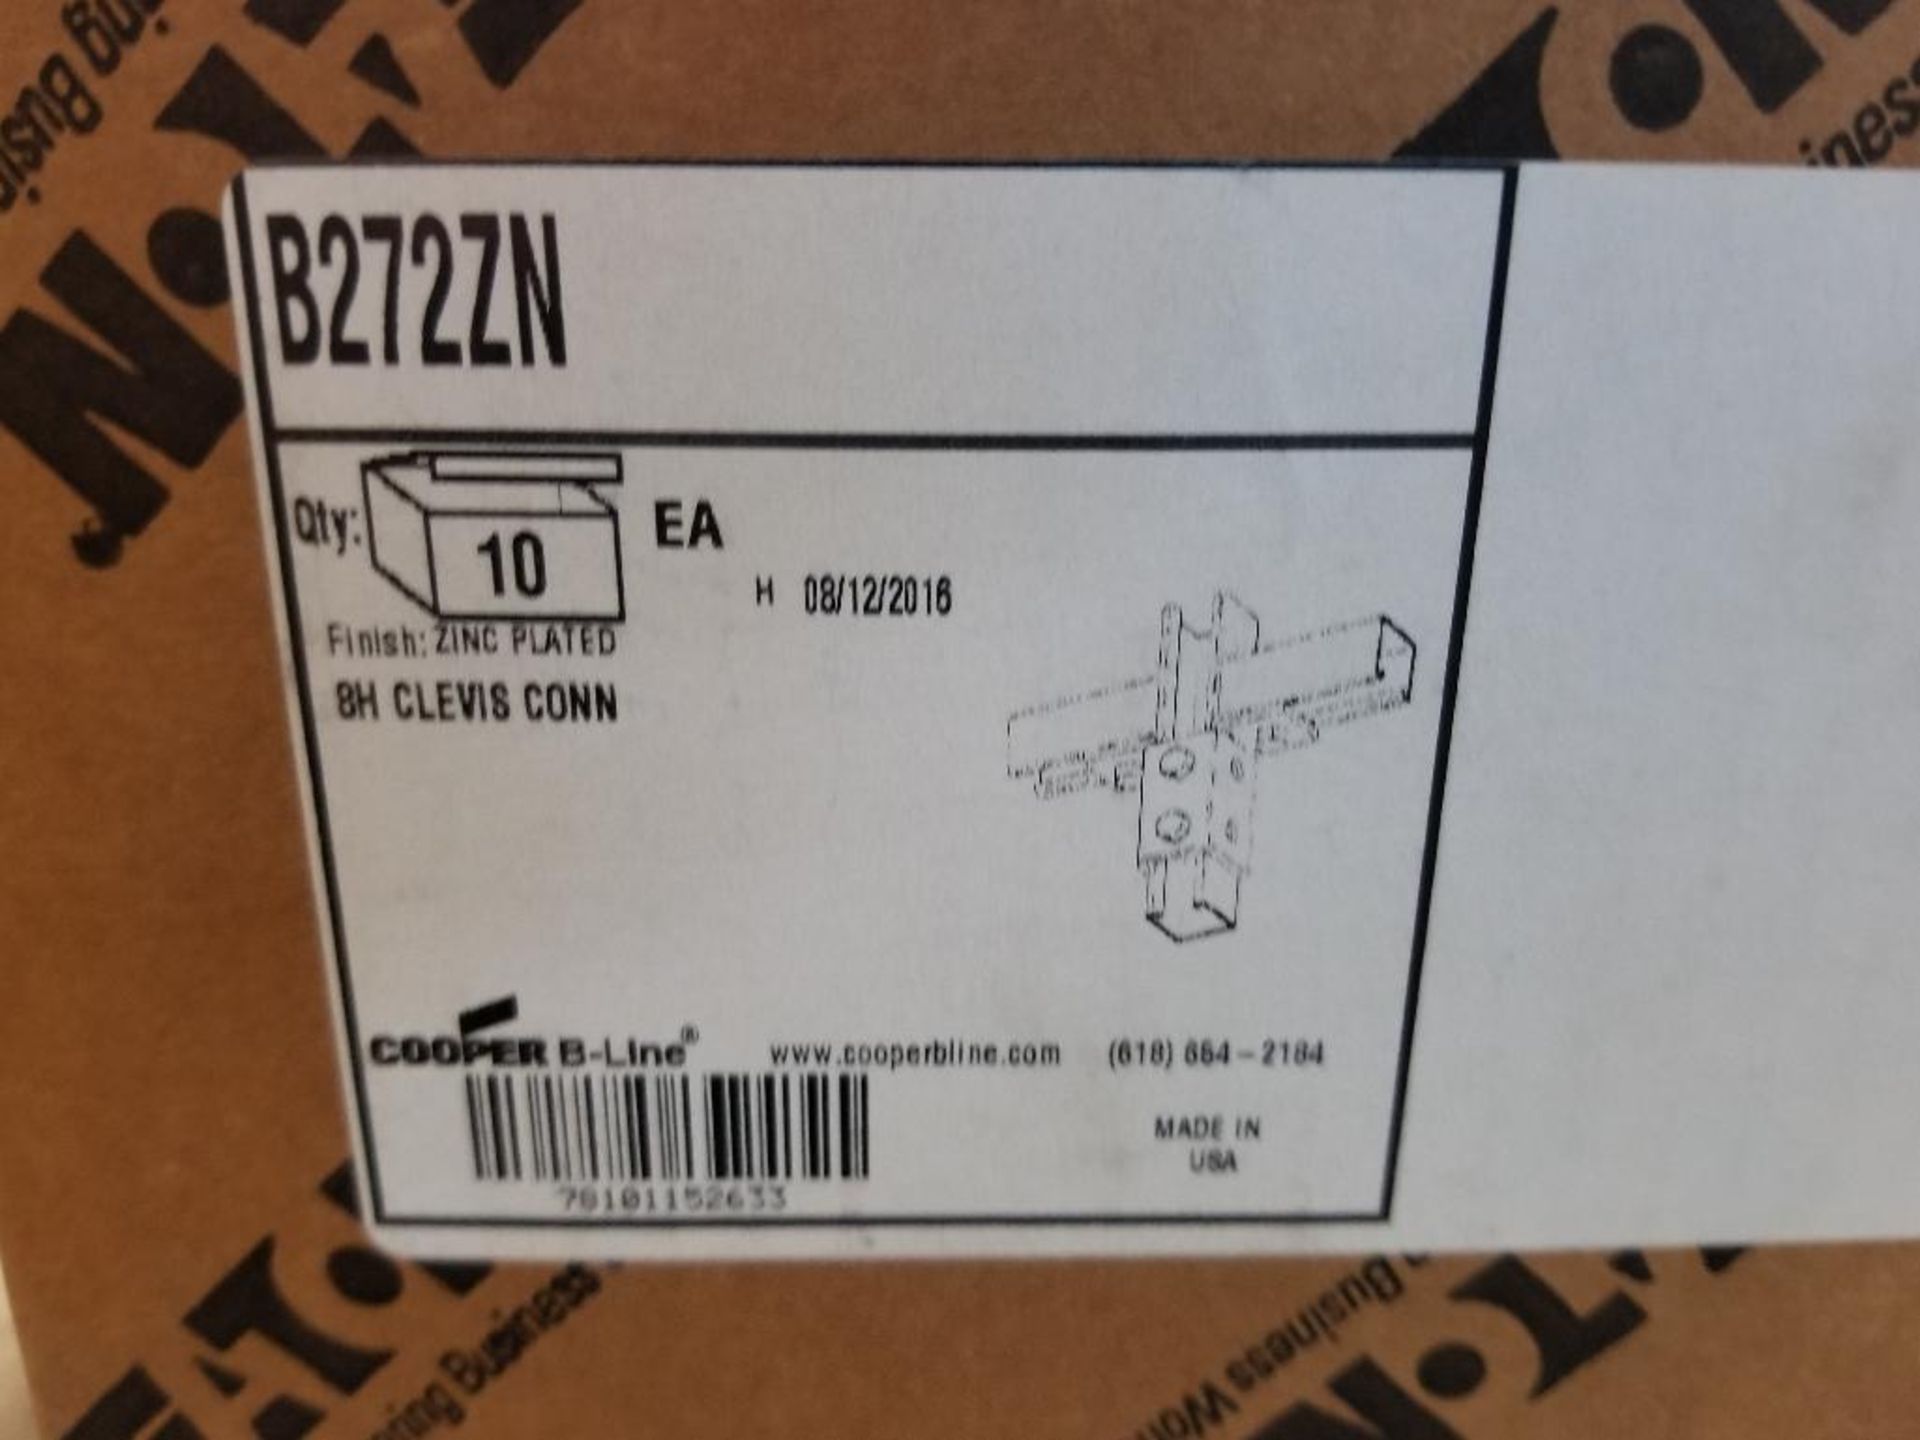 Qty 10 - Eaton connector. New in bulk box. - Image 2 of 2